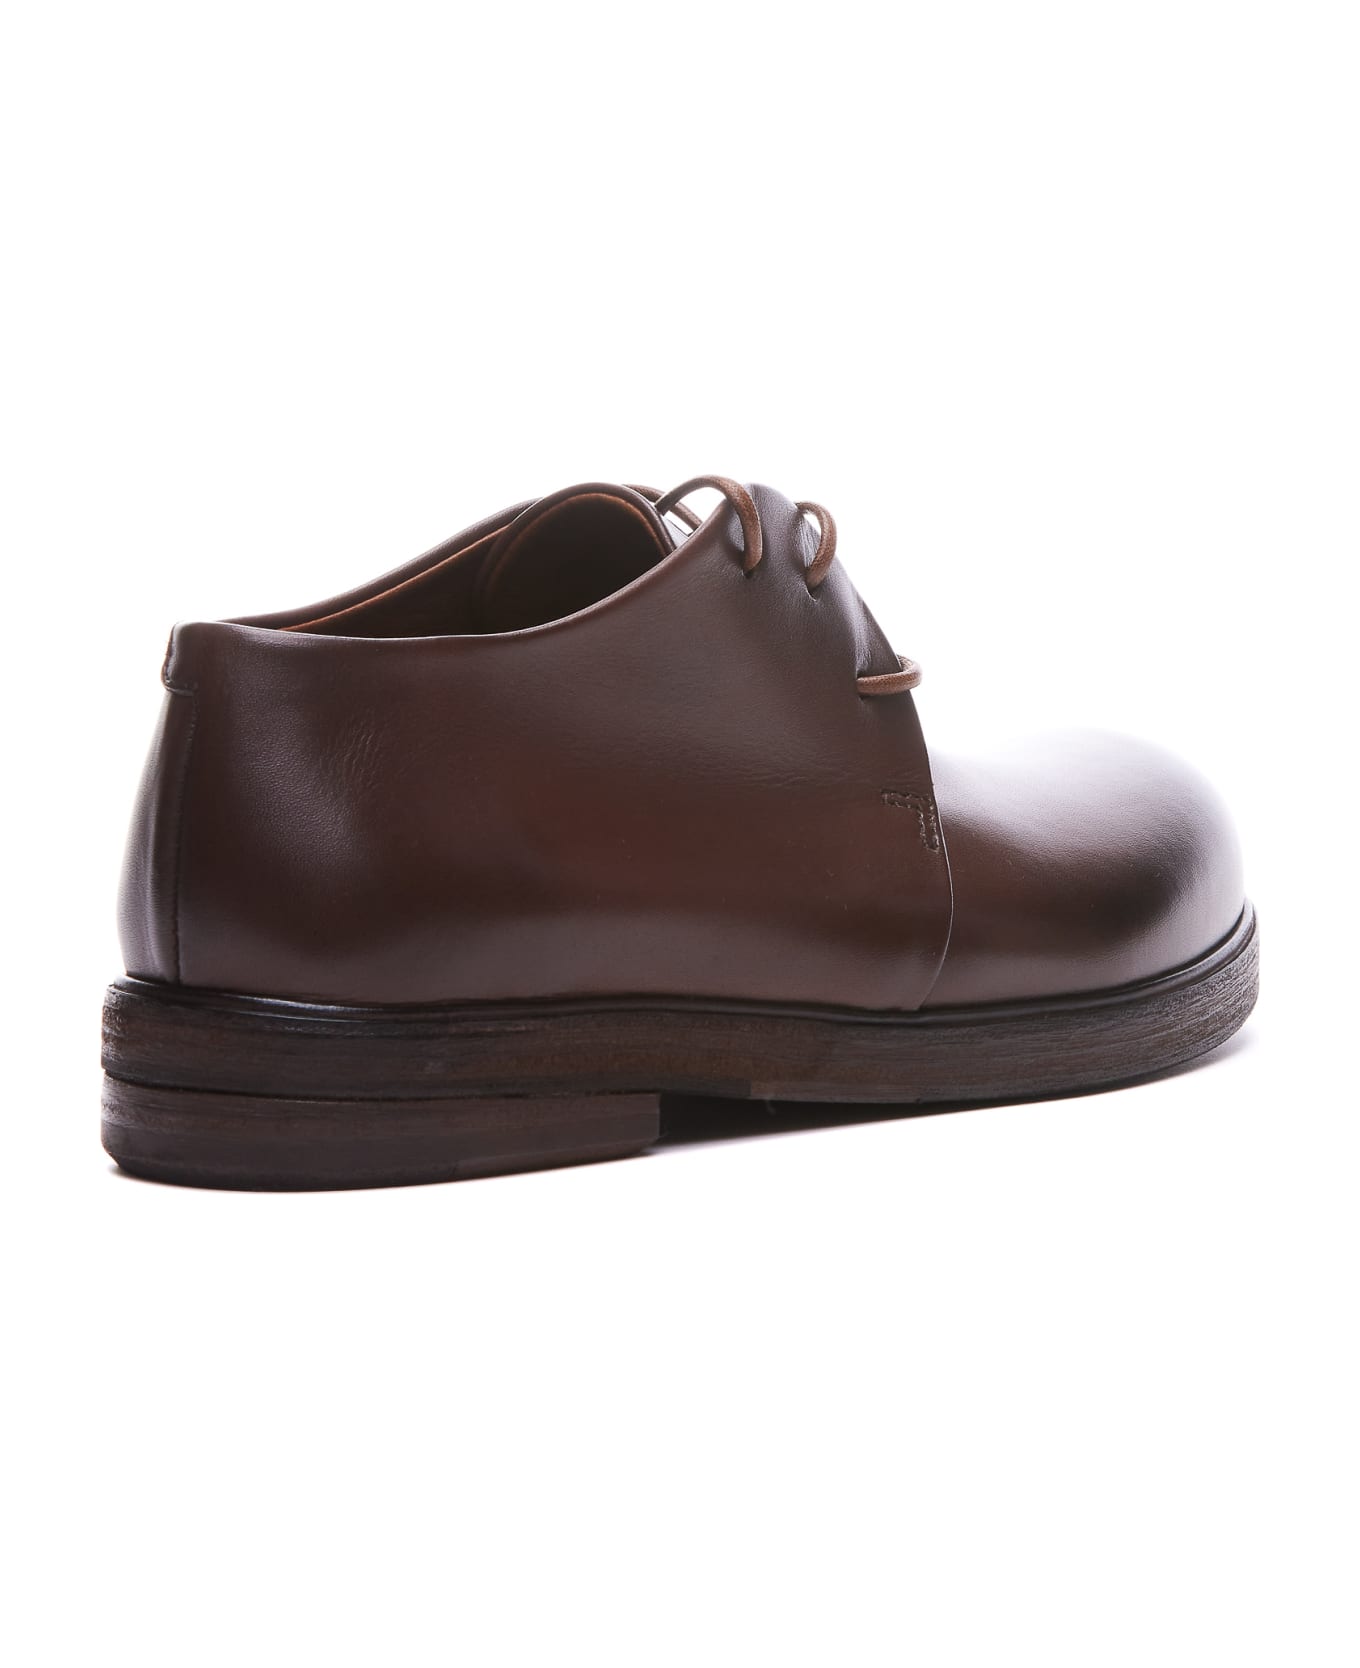 Marsell Zucca Derby Lace Up Shoes - Brown